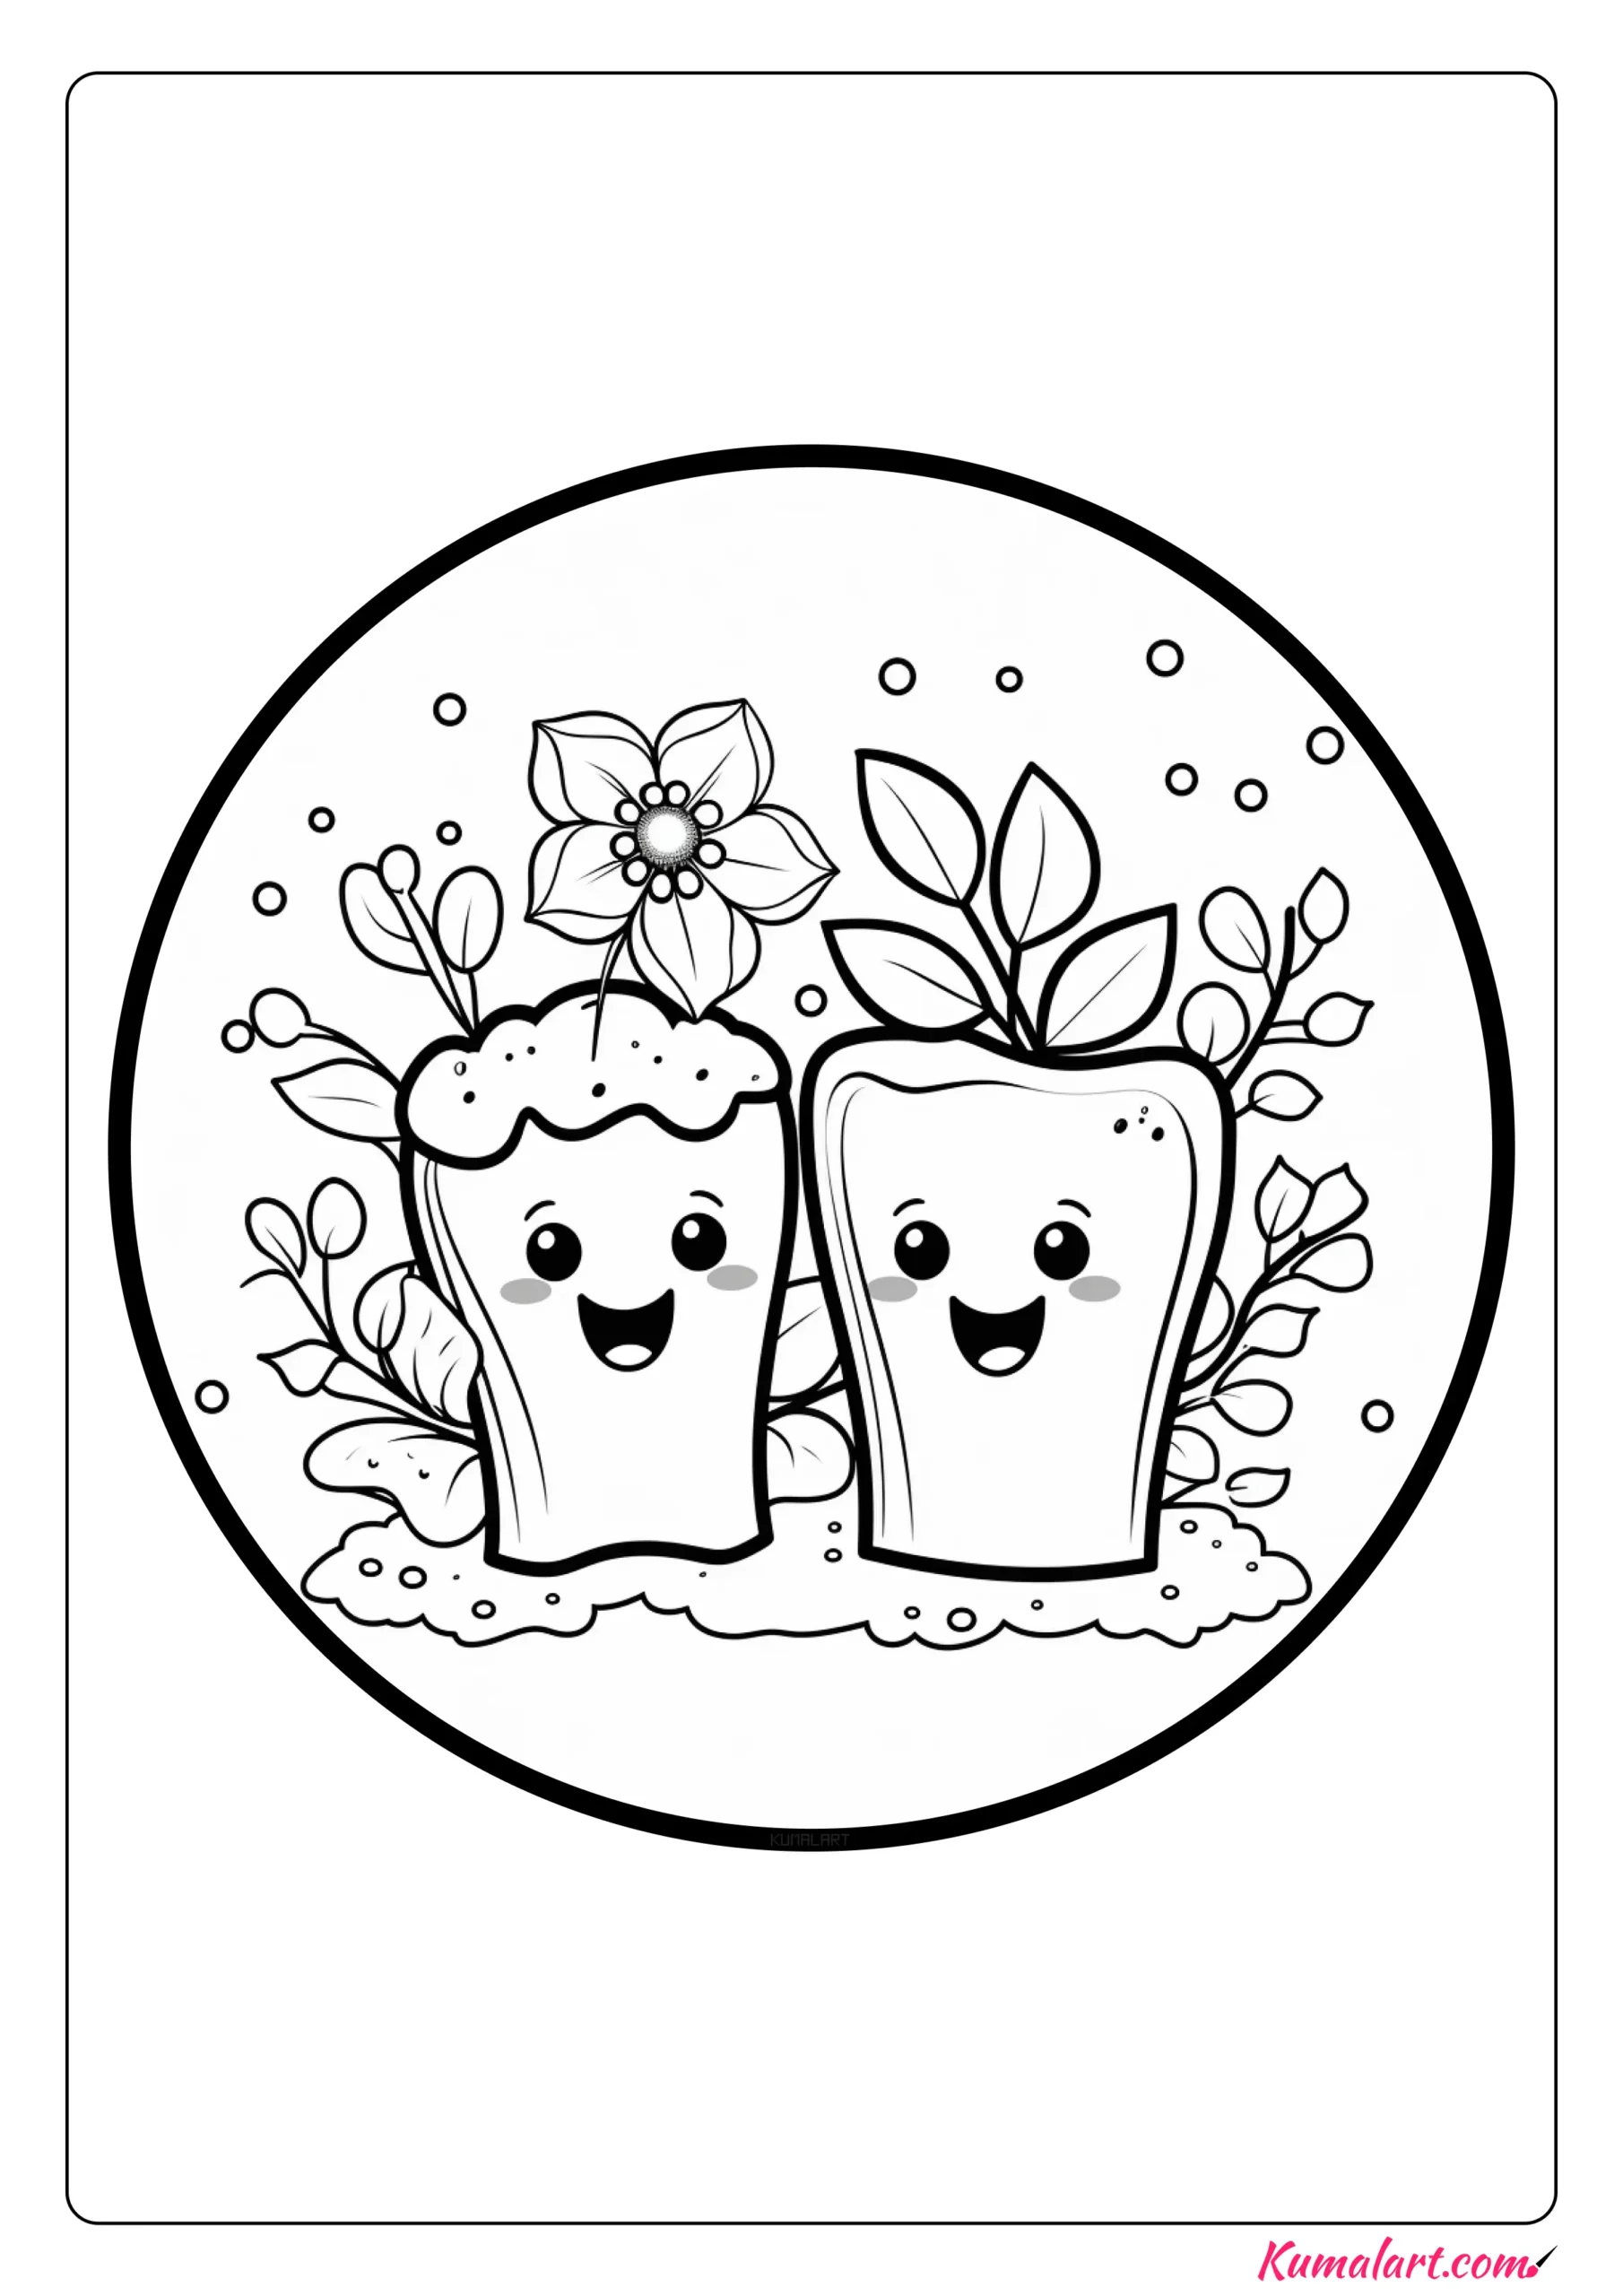 Stunning Tooth Brushing Coloring Page